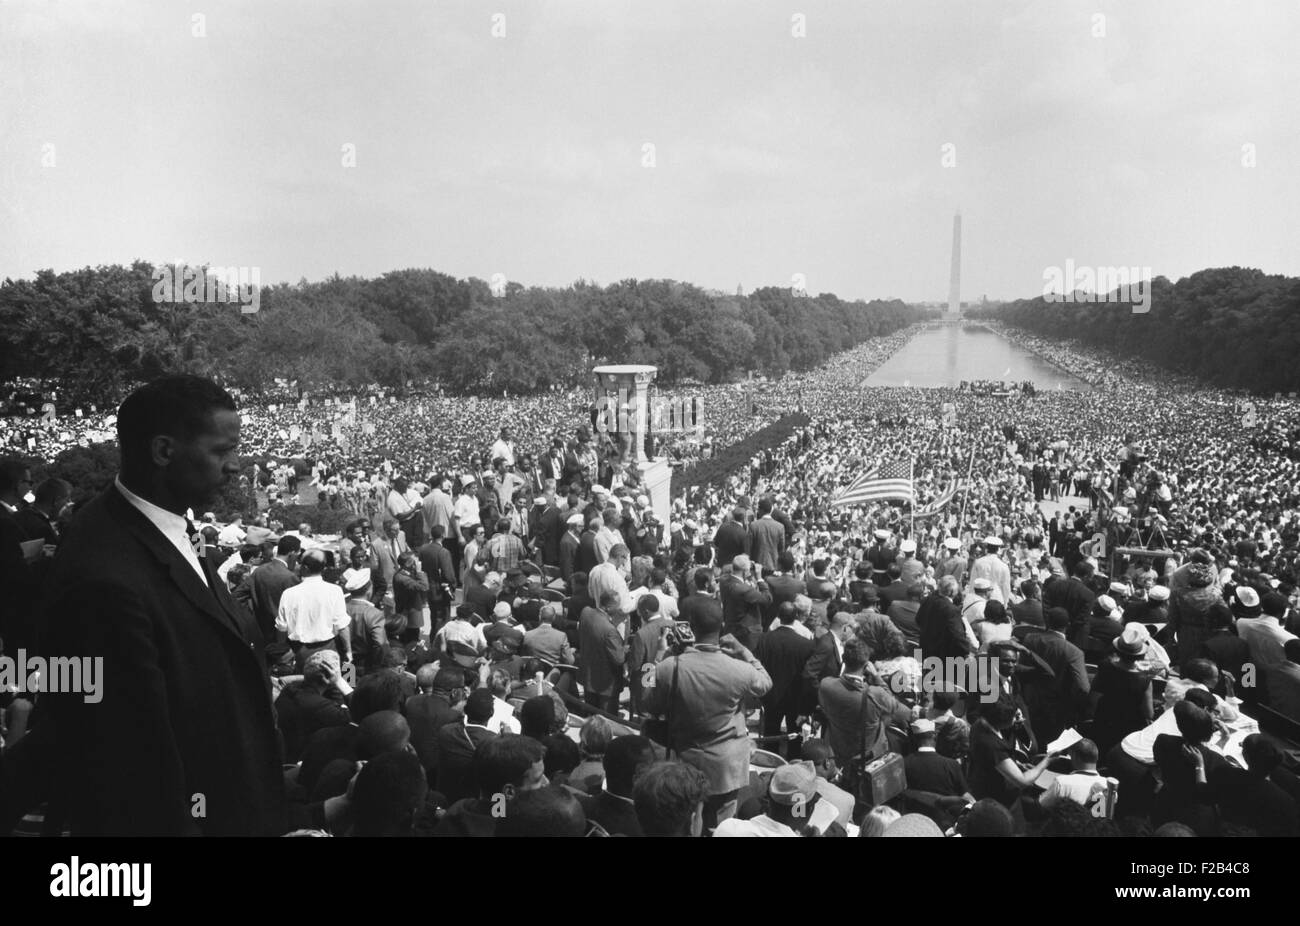 Huge crowd viewed from the Lincoln Memorial during the March on Washington, Aug. 28, 1963. Approximately 250,000 people participated in the march. - (BSLOC 2015 1 98) Stock Photo